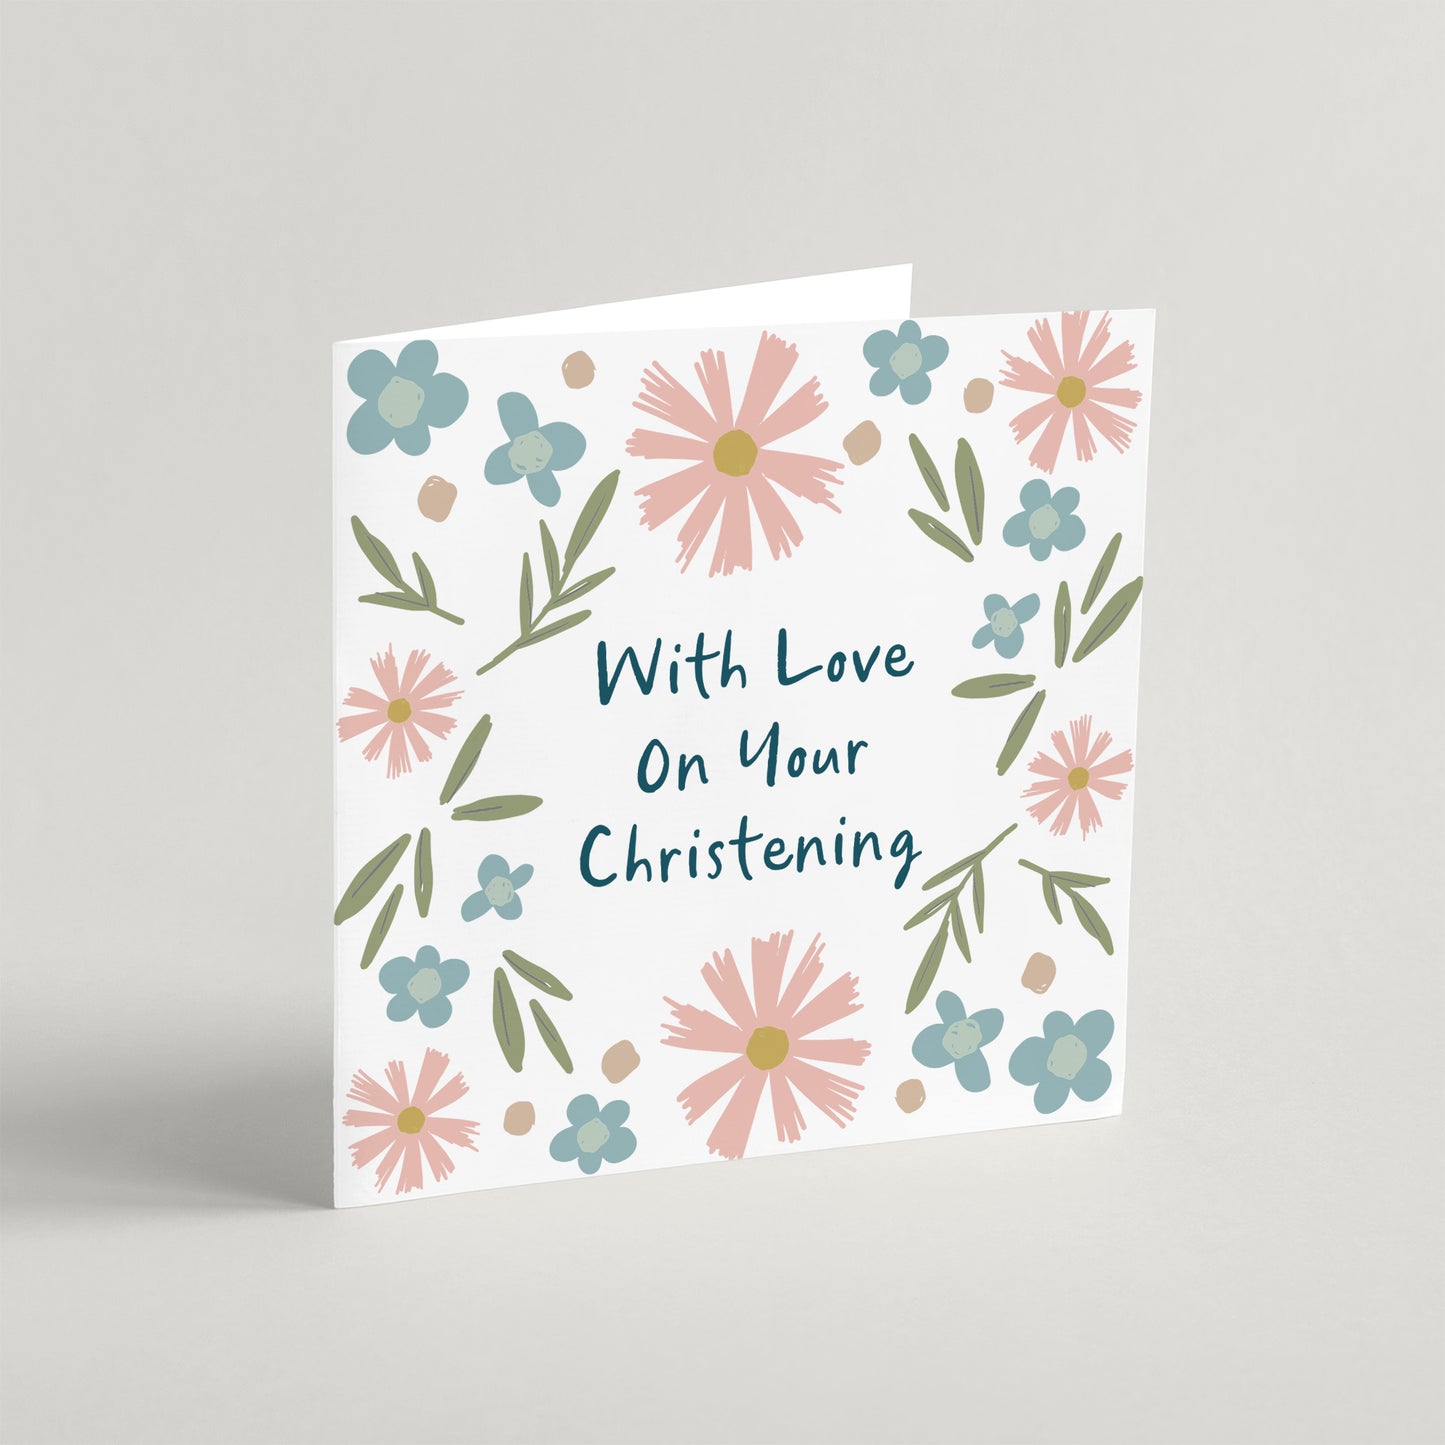 'With Love On Your Christening' Greeting Card & Envelope